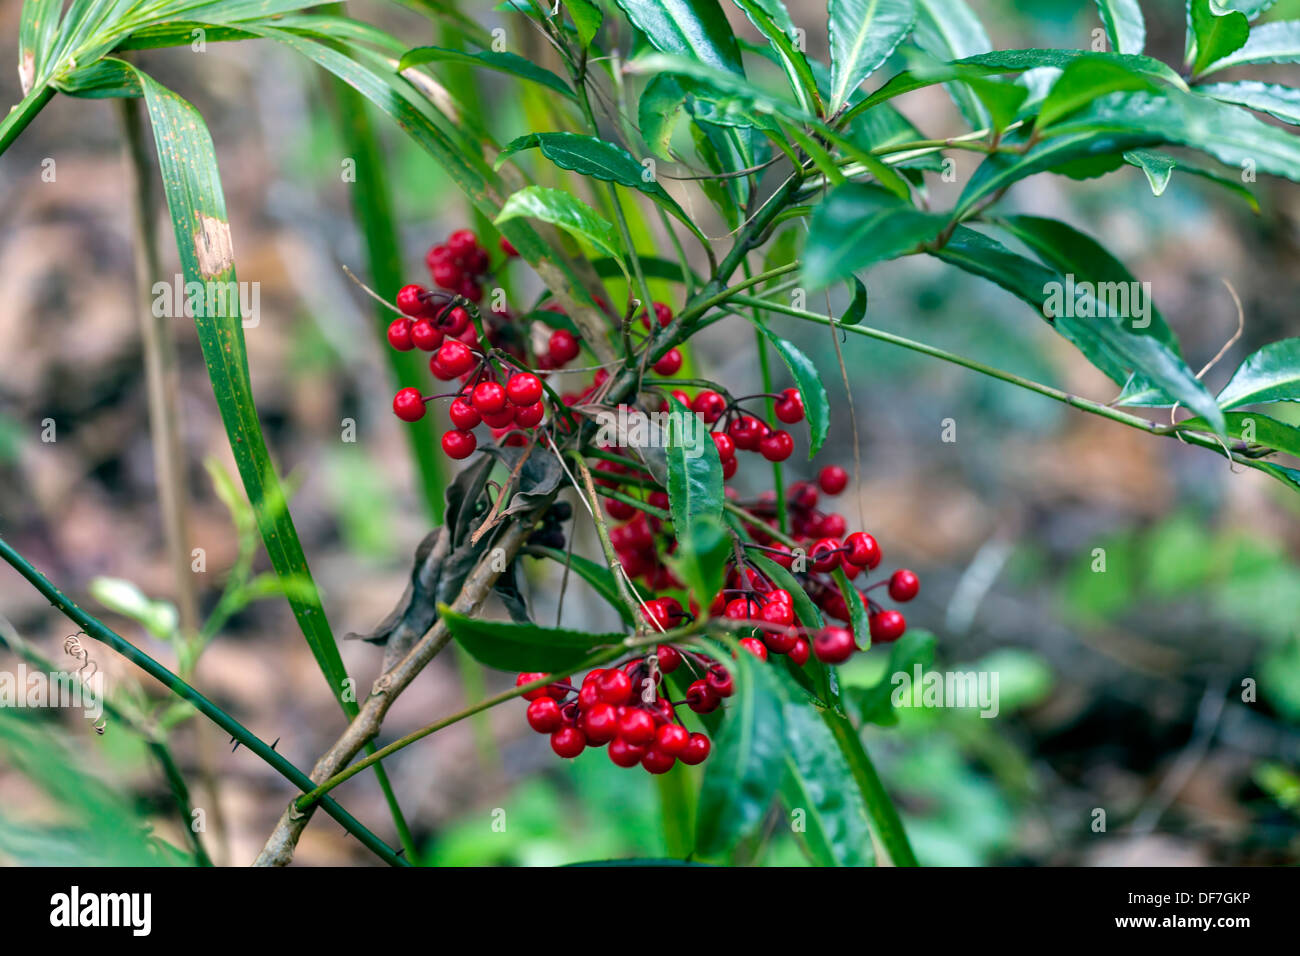 Clusters of red berries on a wild wetland shrub or bush. Stock Photo